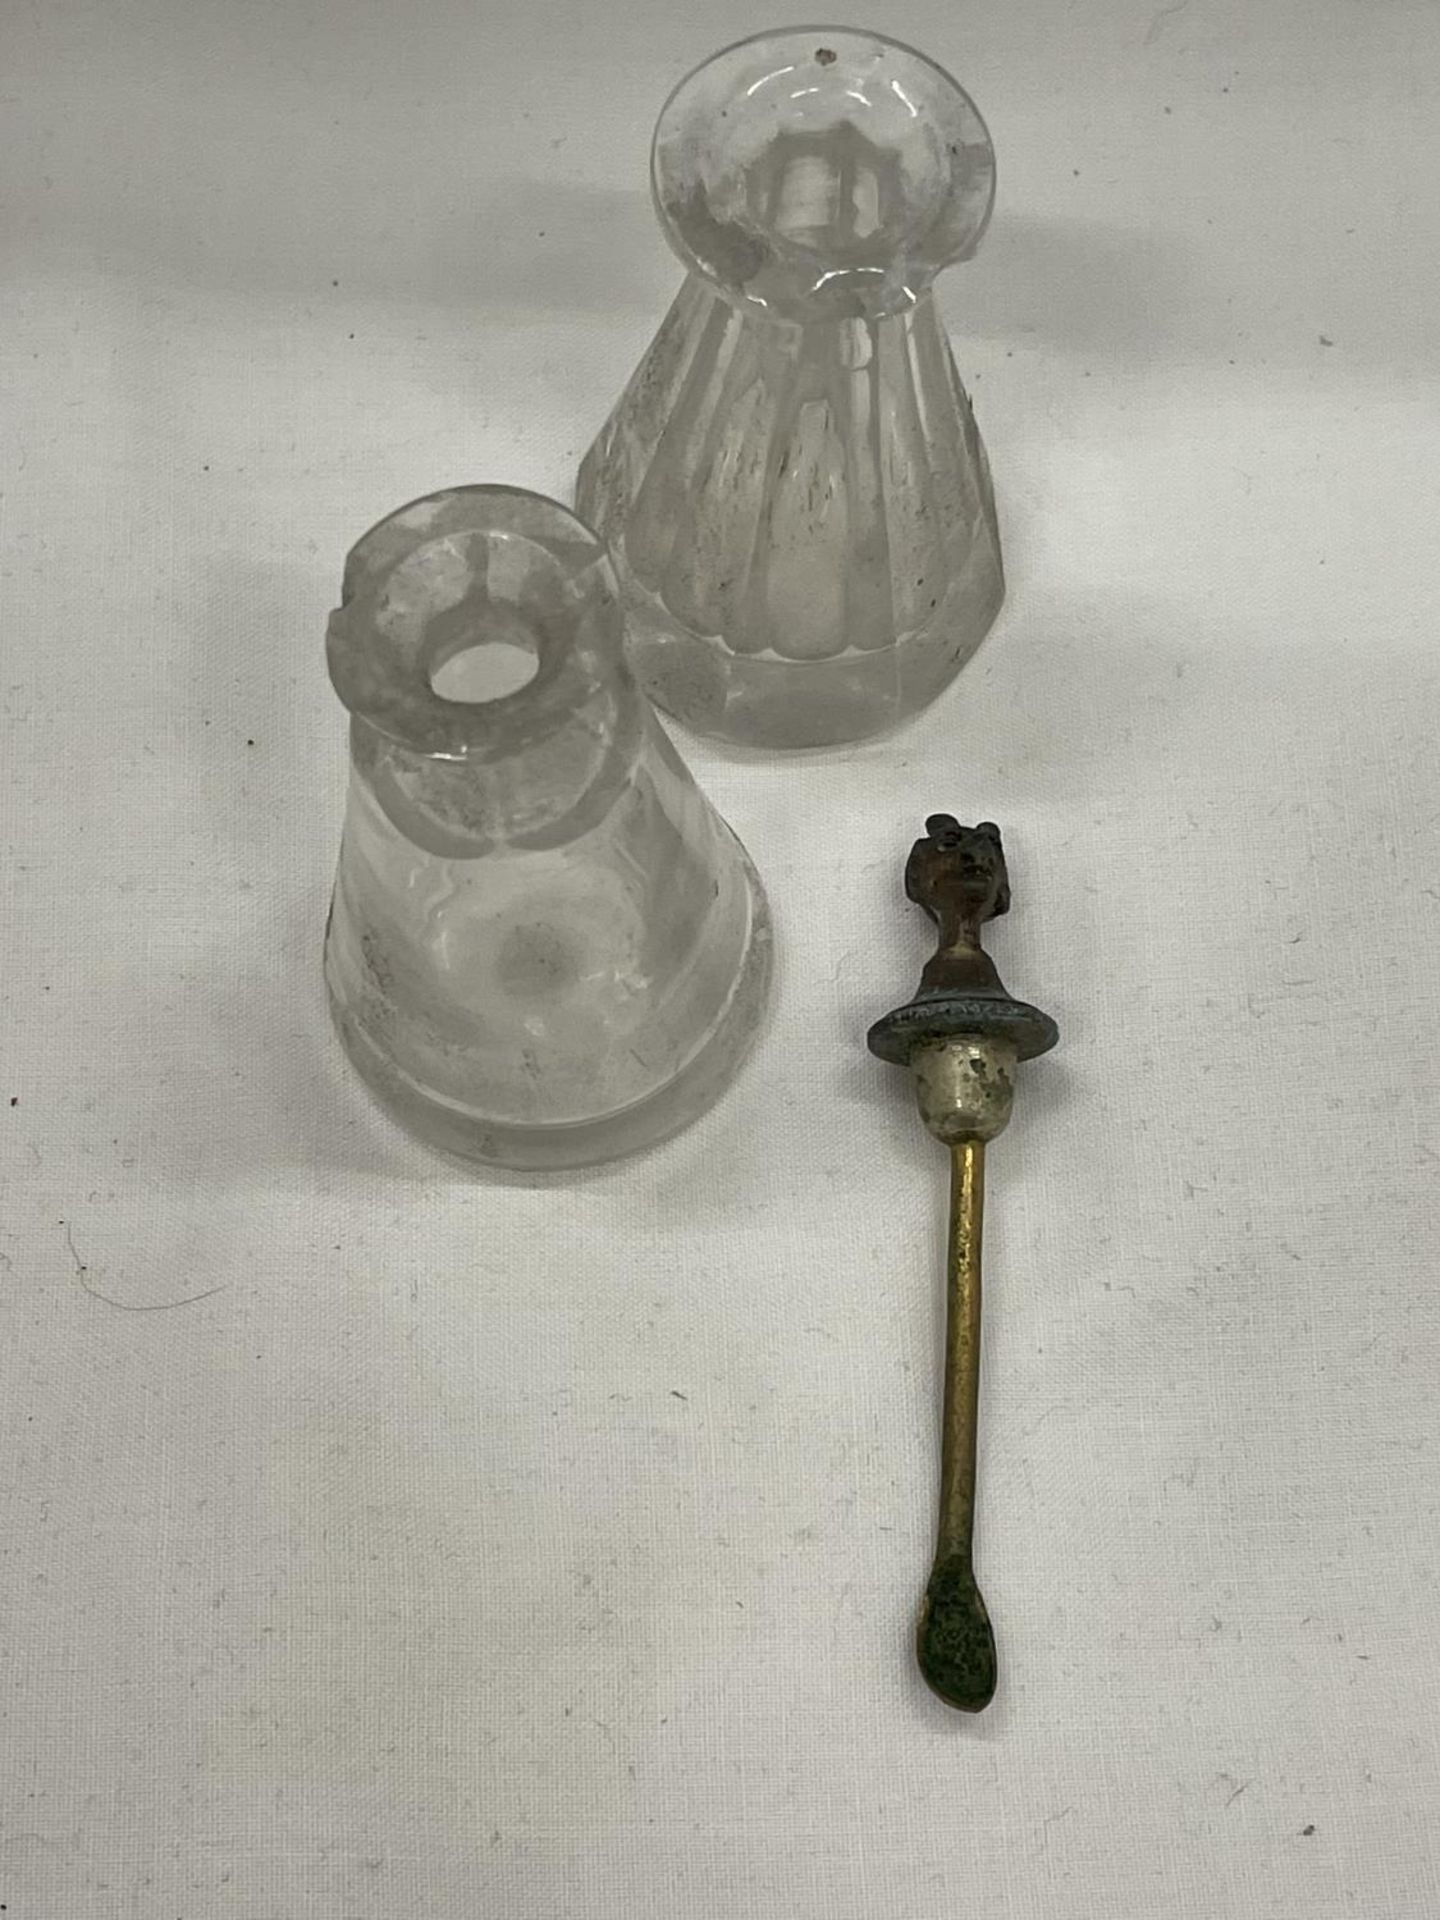 A RARE POSSIBLY SILVER AND GLASS CAYENNE BOTTLE & SPOON. THIS UNUSUAL PIECE IS A TALL AND SLENDER - Image 2 of 4